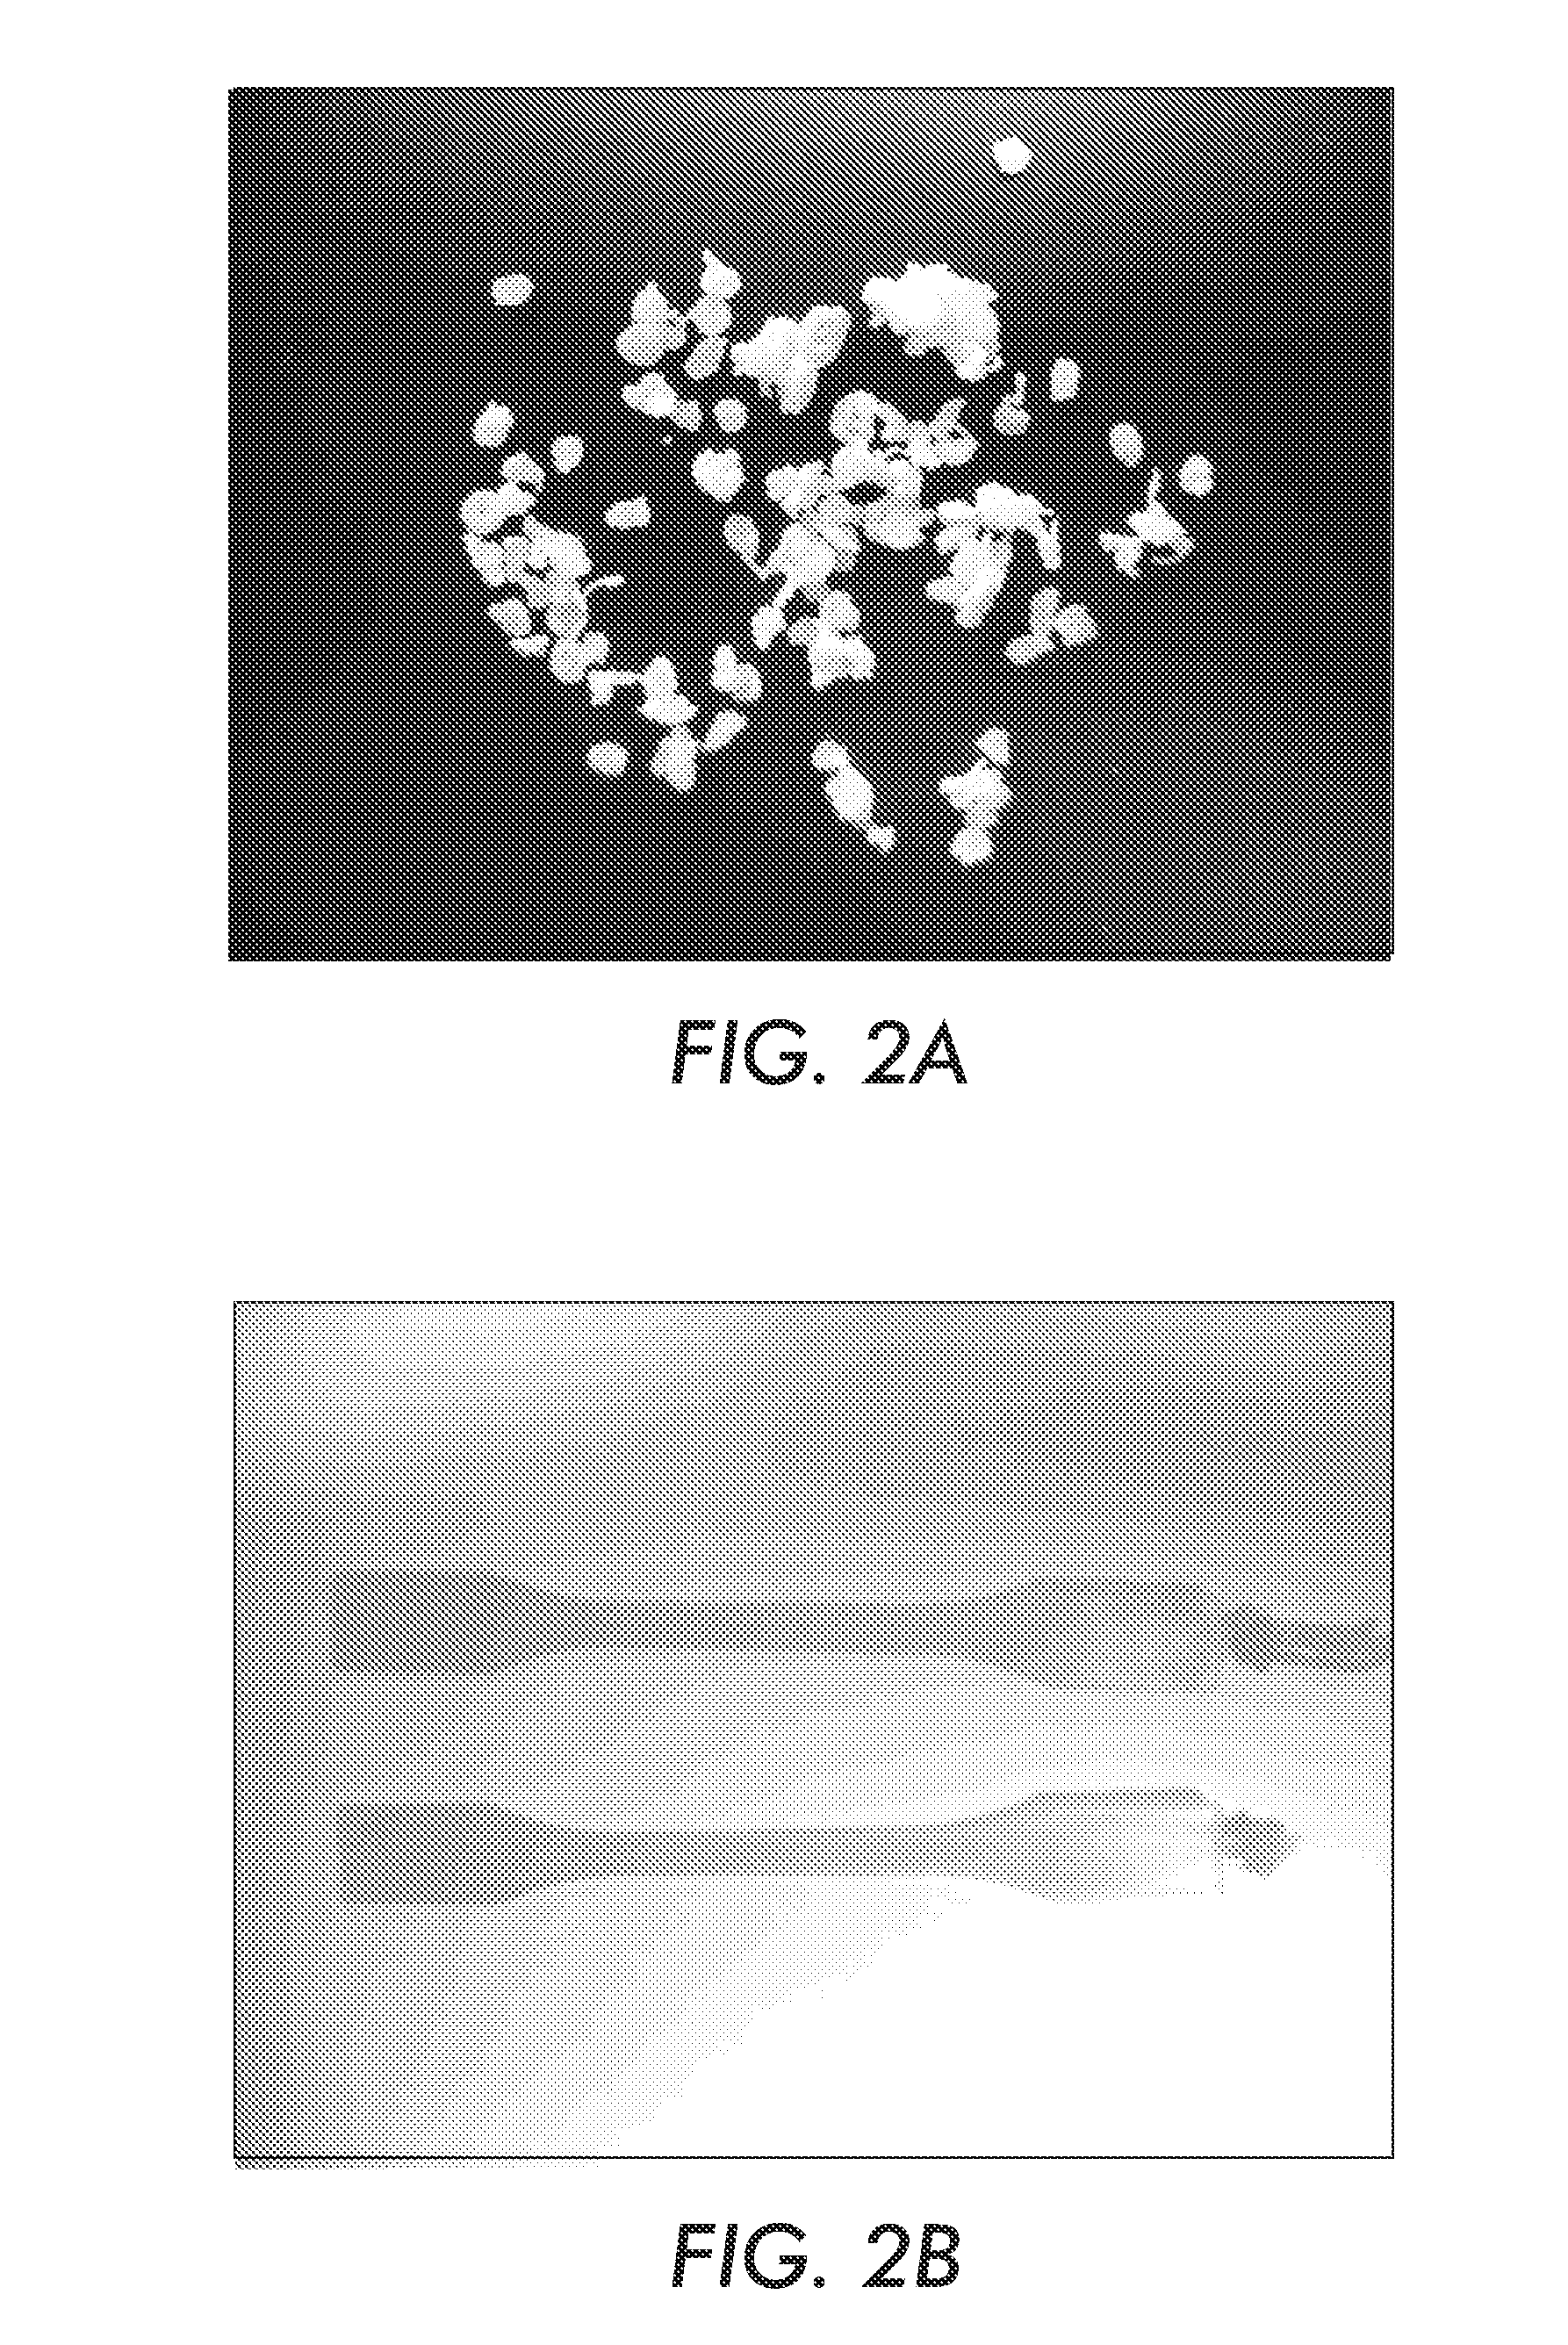 Nanocomposite master batch composition and method of manufacture